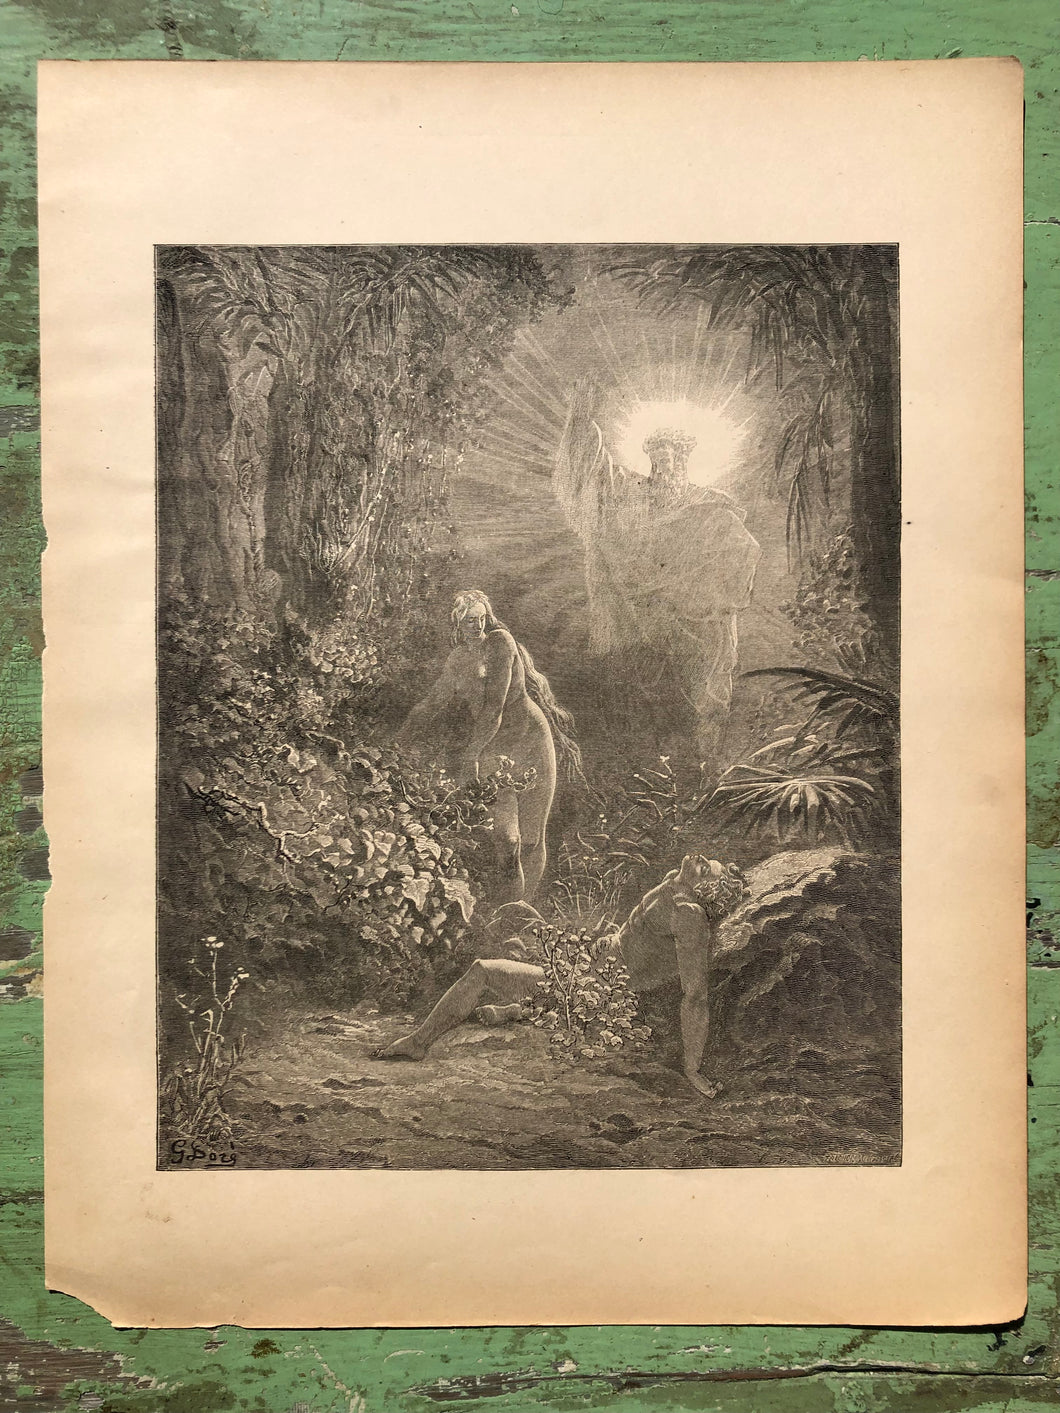 Creation of Eve. From The Dore Bible Gallery by Gustave Dore